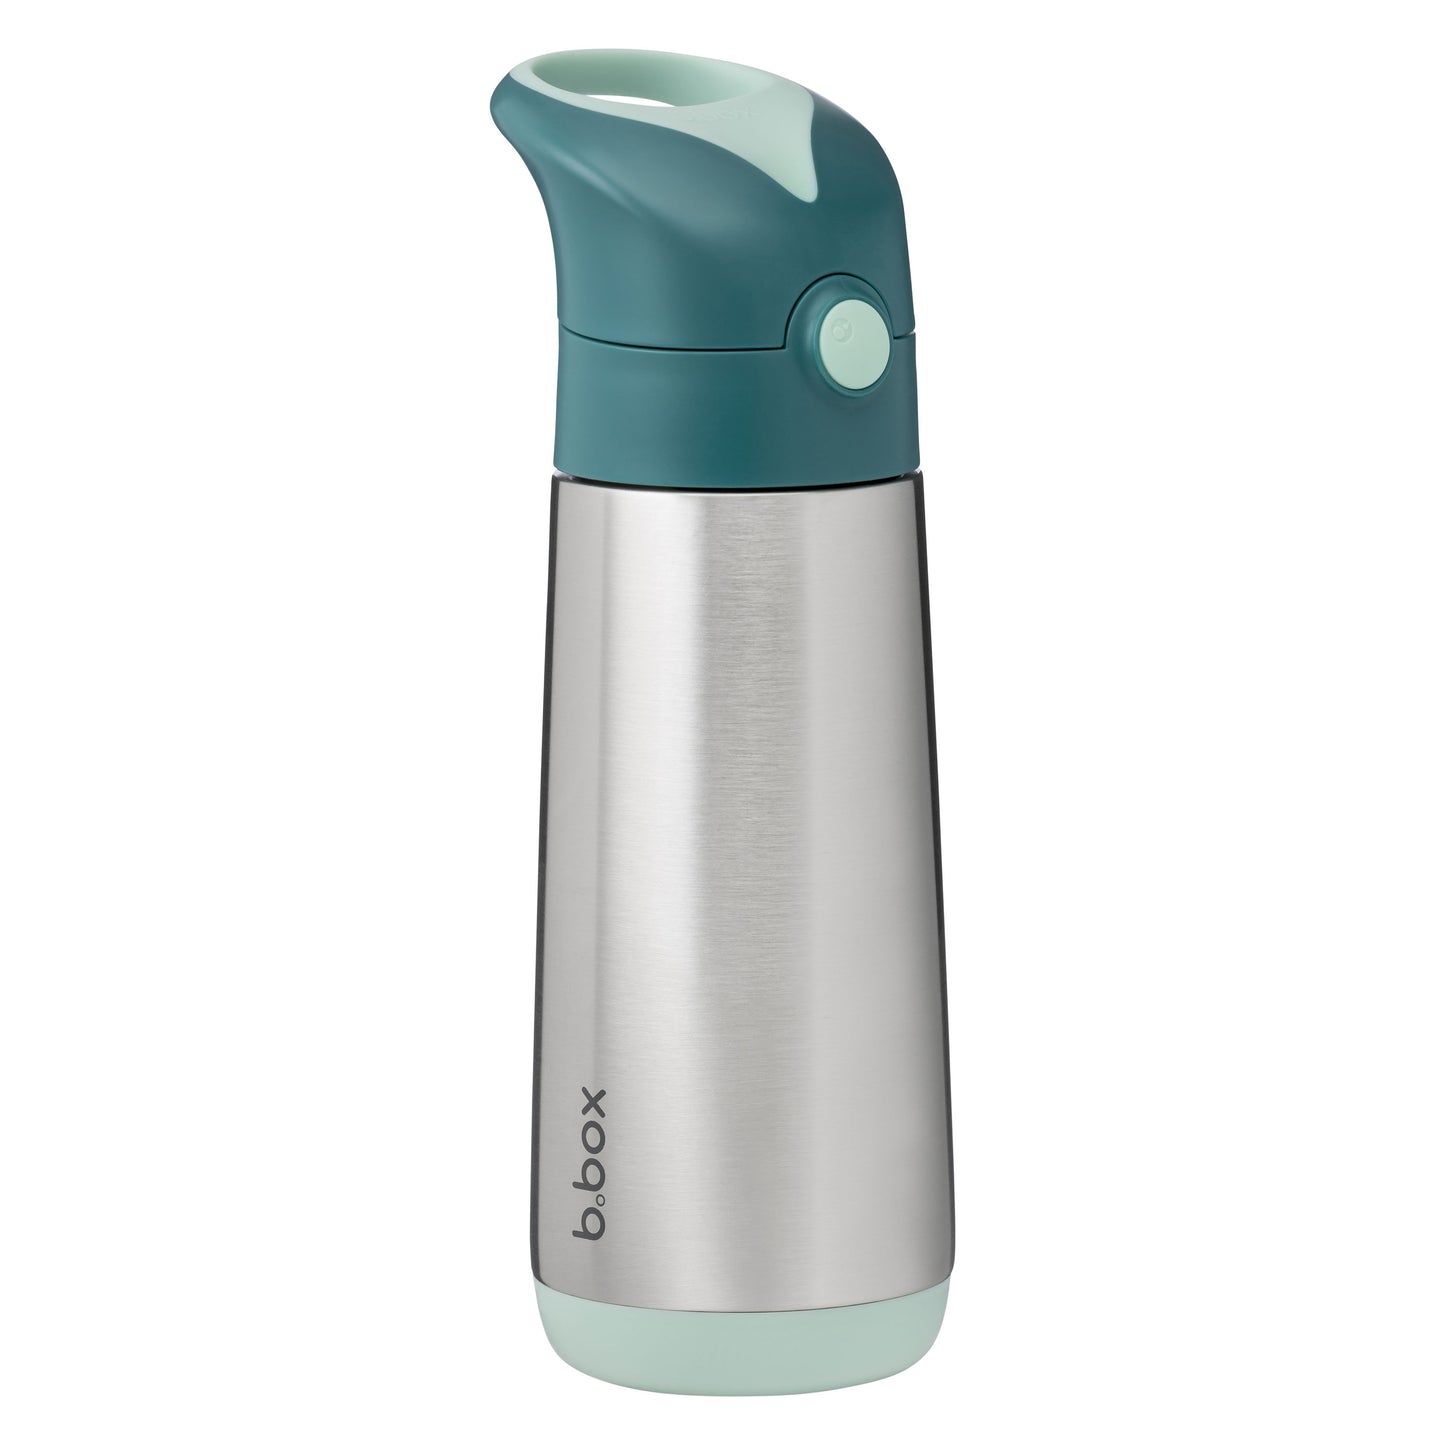 Insulated Drink Bottle - 500mls - Emerald Forest